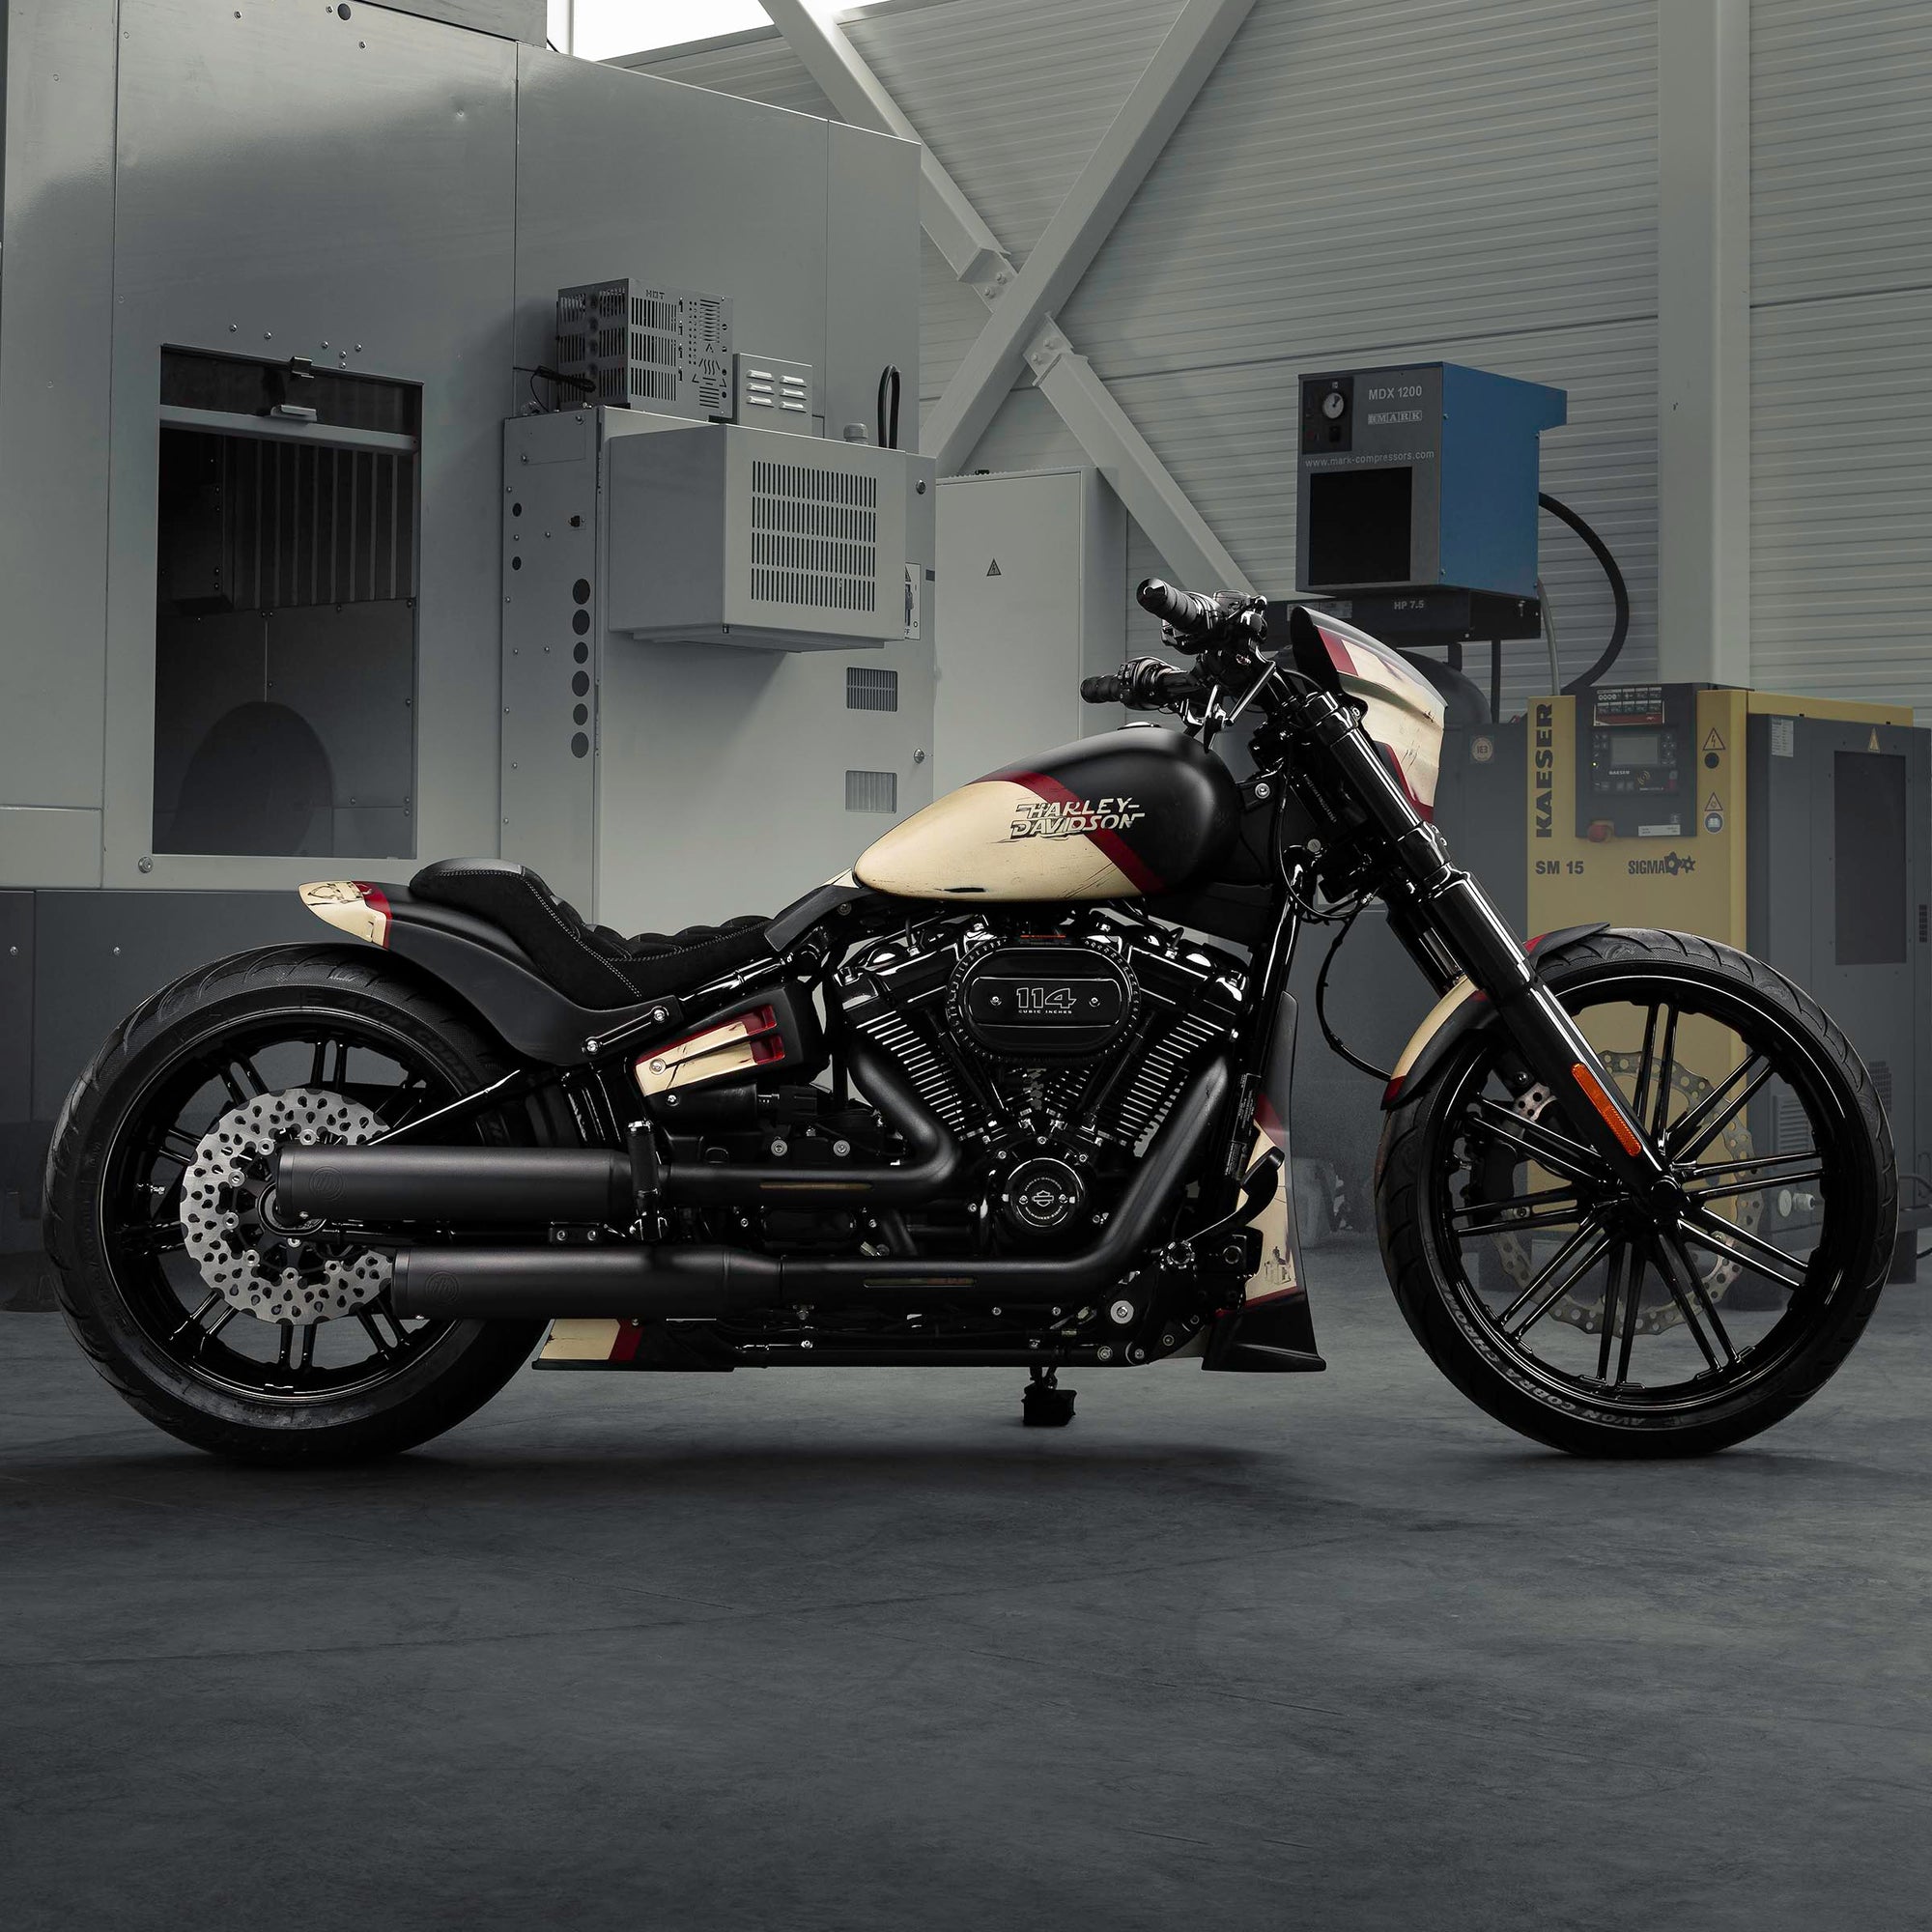 Modified Harley Davidson Breakout motorcycle with Killer Custom parts from the side in a modern bike shop